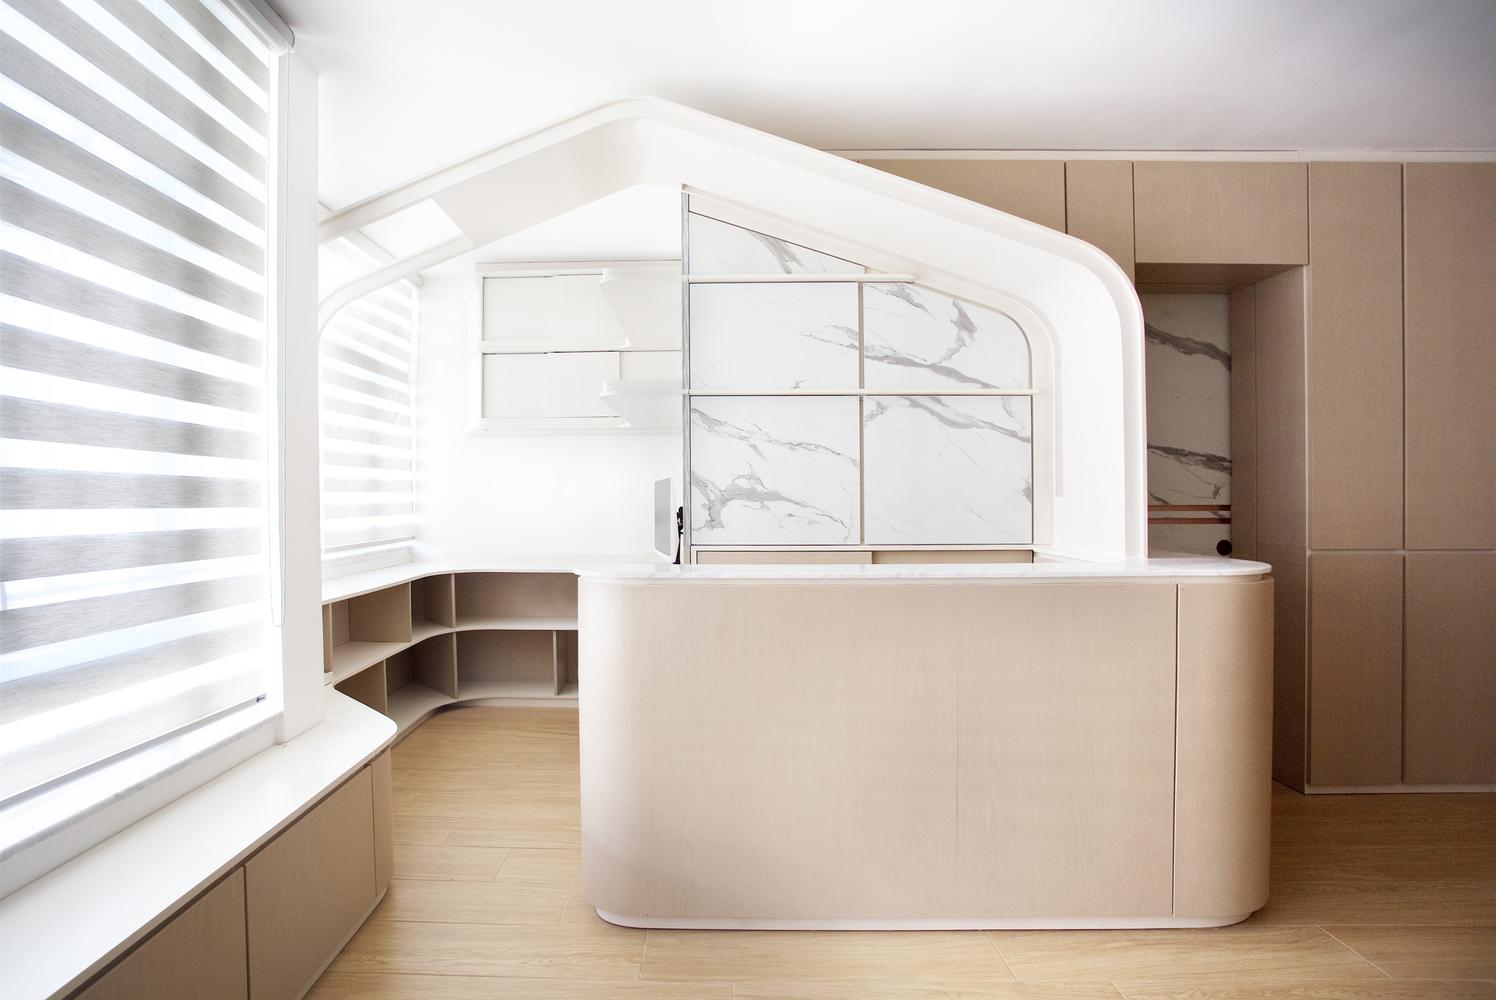 This 606 sq. ft. Residence Has A Seamless Home Office Design 